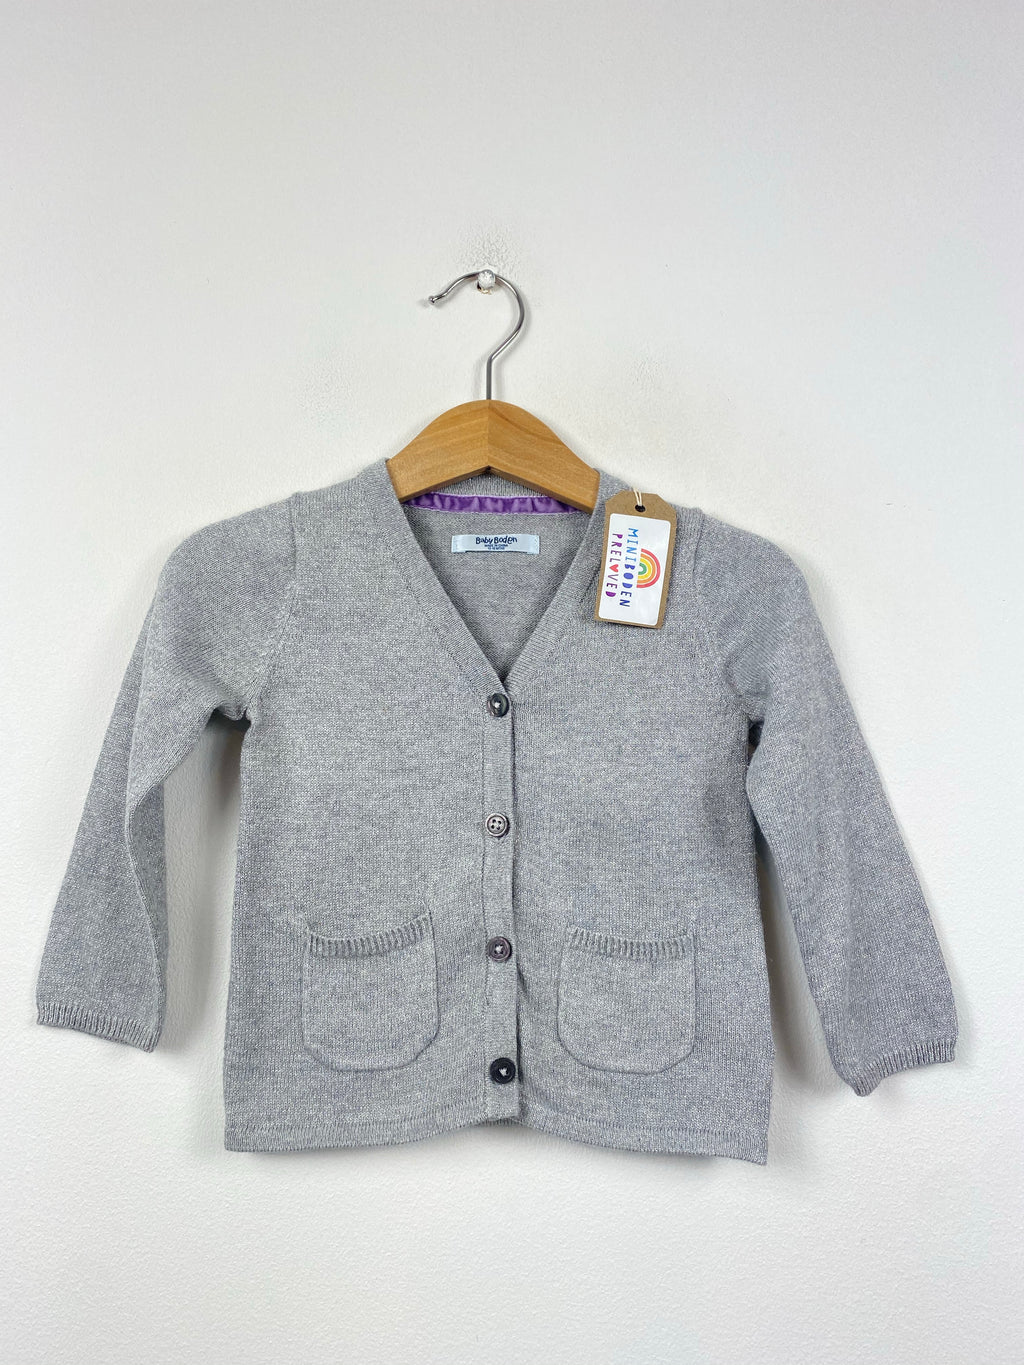 Grey Sparkle Party Cardigan (12-18 Months)